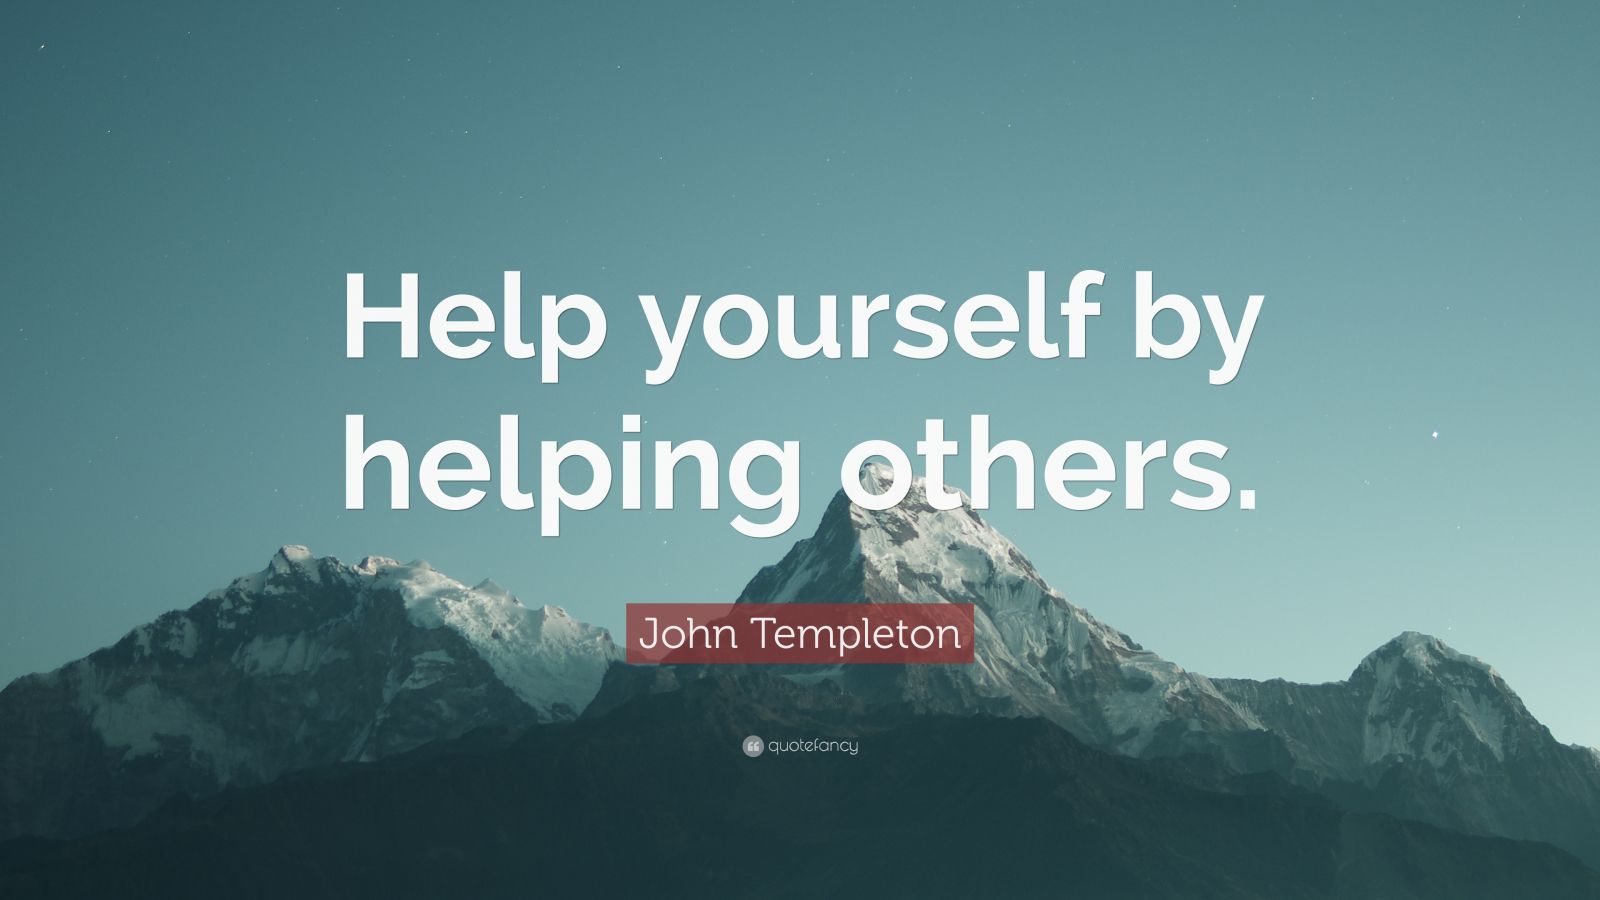 John Templeton Quote: “Help yourself by helping others.” (12 wallpapers ...